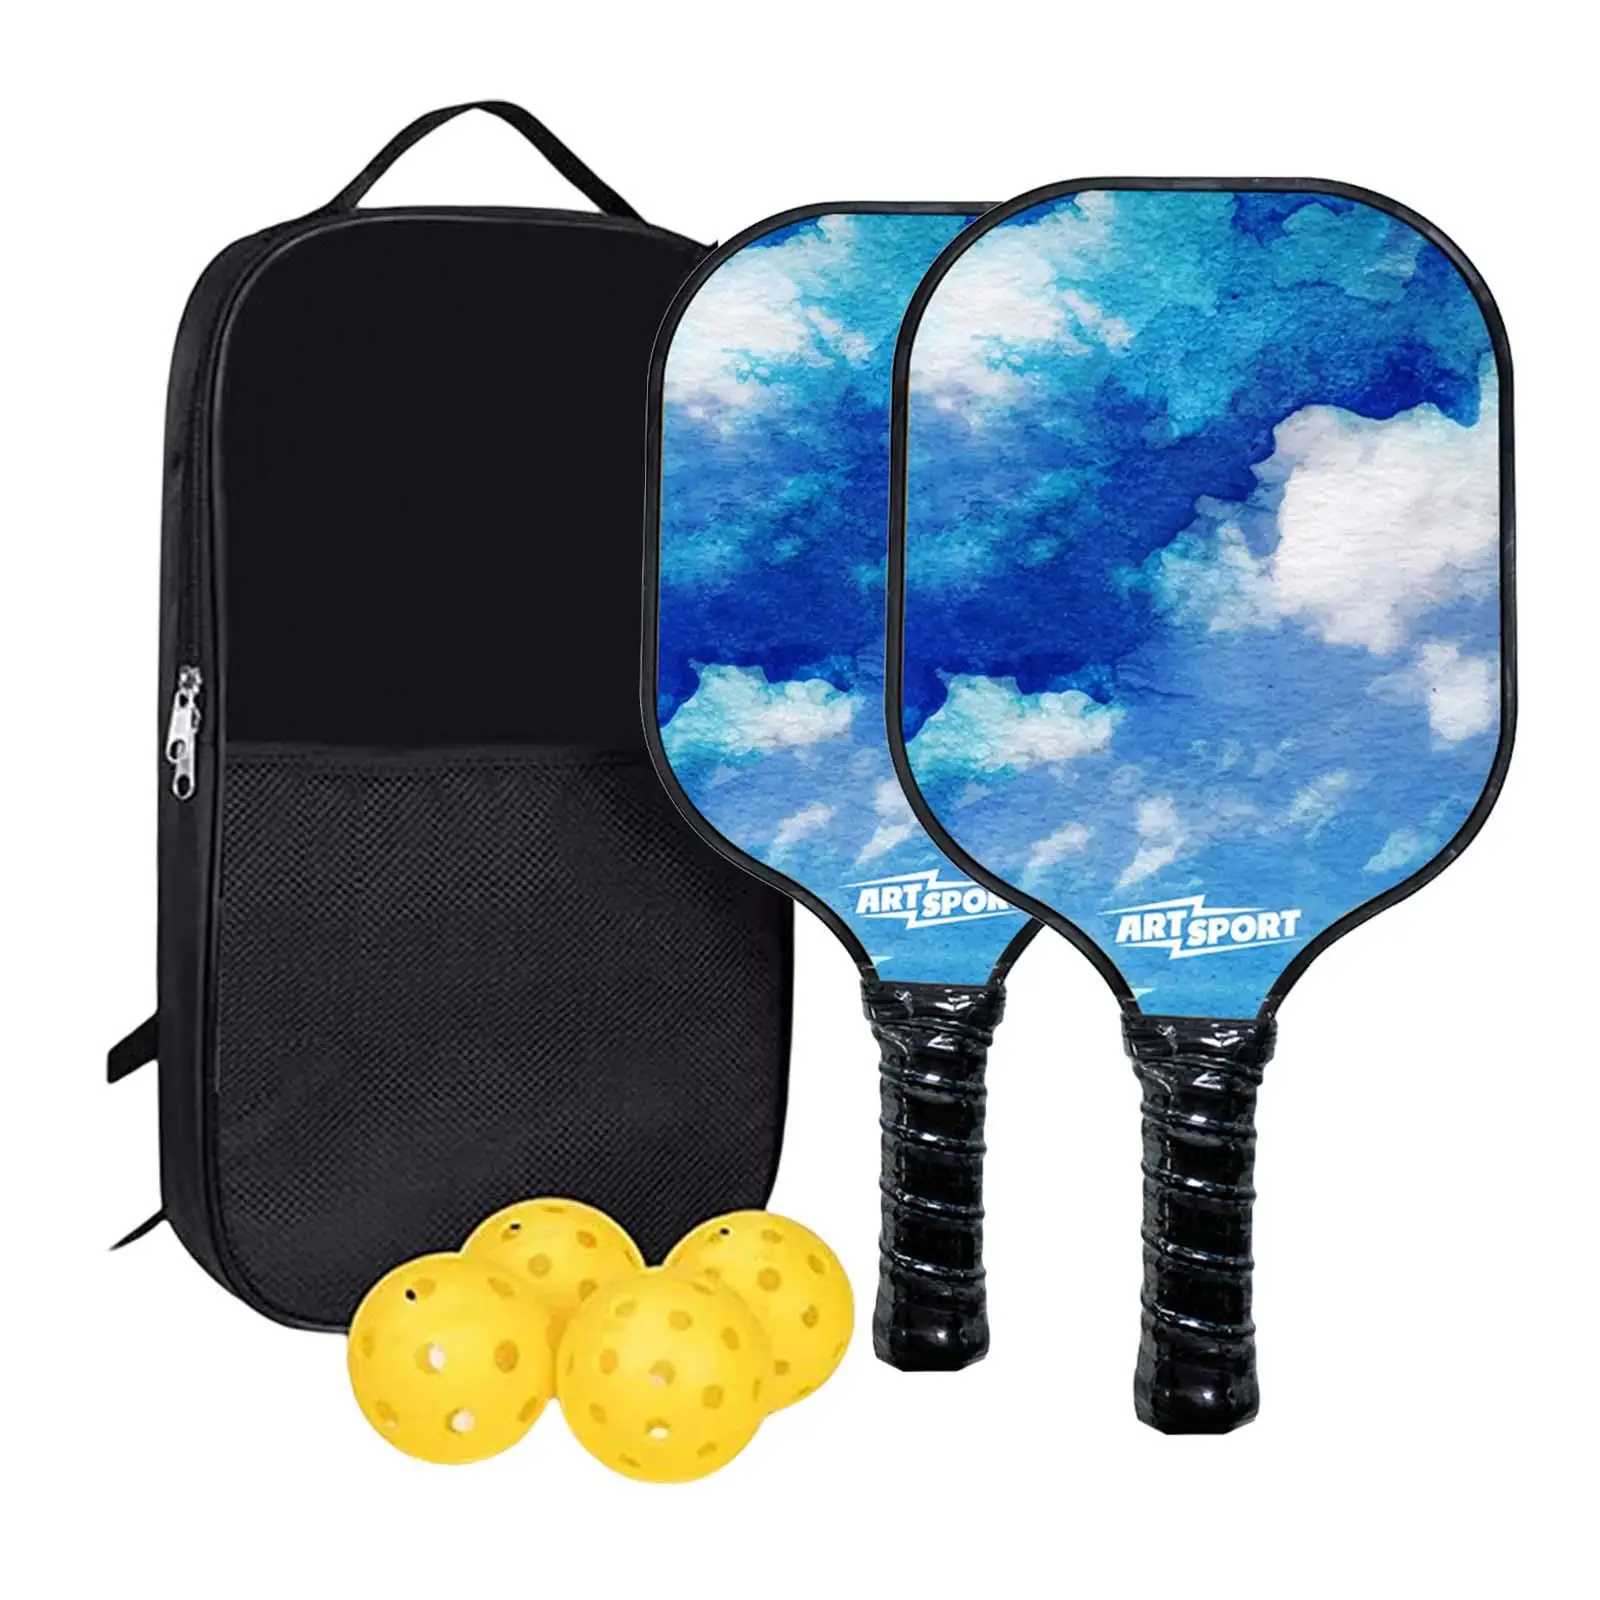 Professional Pickleball Rackets Pickleball Paddles Set 2 Paddles 4 Balls 1 Bag Rackets Training Acces for Indoor Outdoor Sports